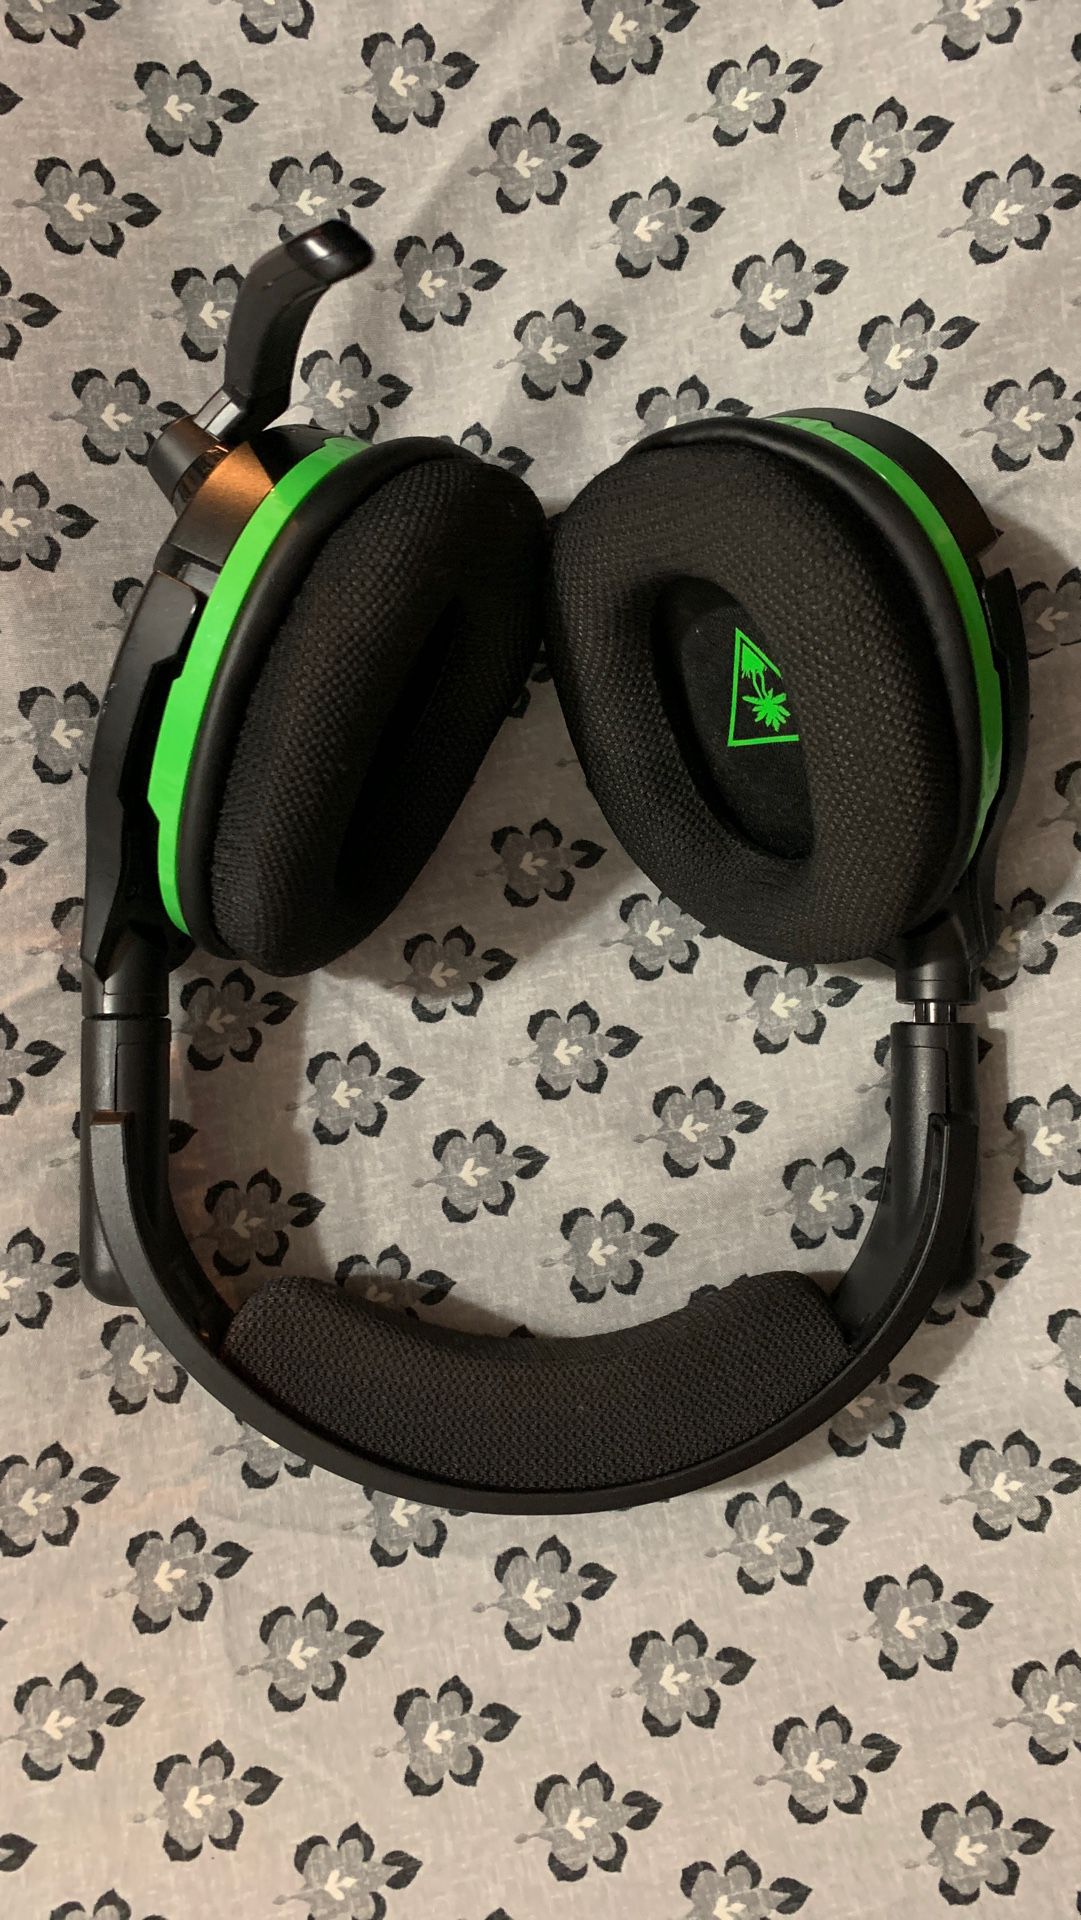 Turtle Beach Headsets 600 wireless stealth for Xbox One